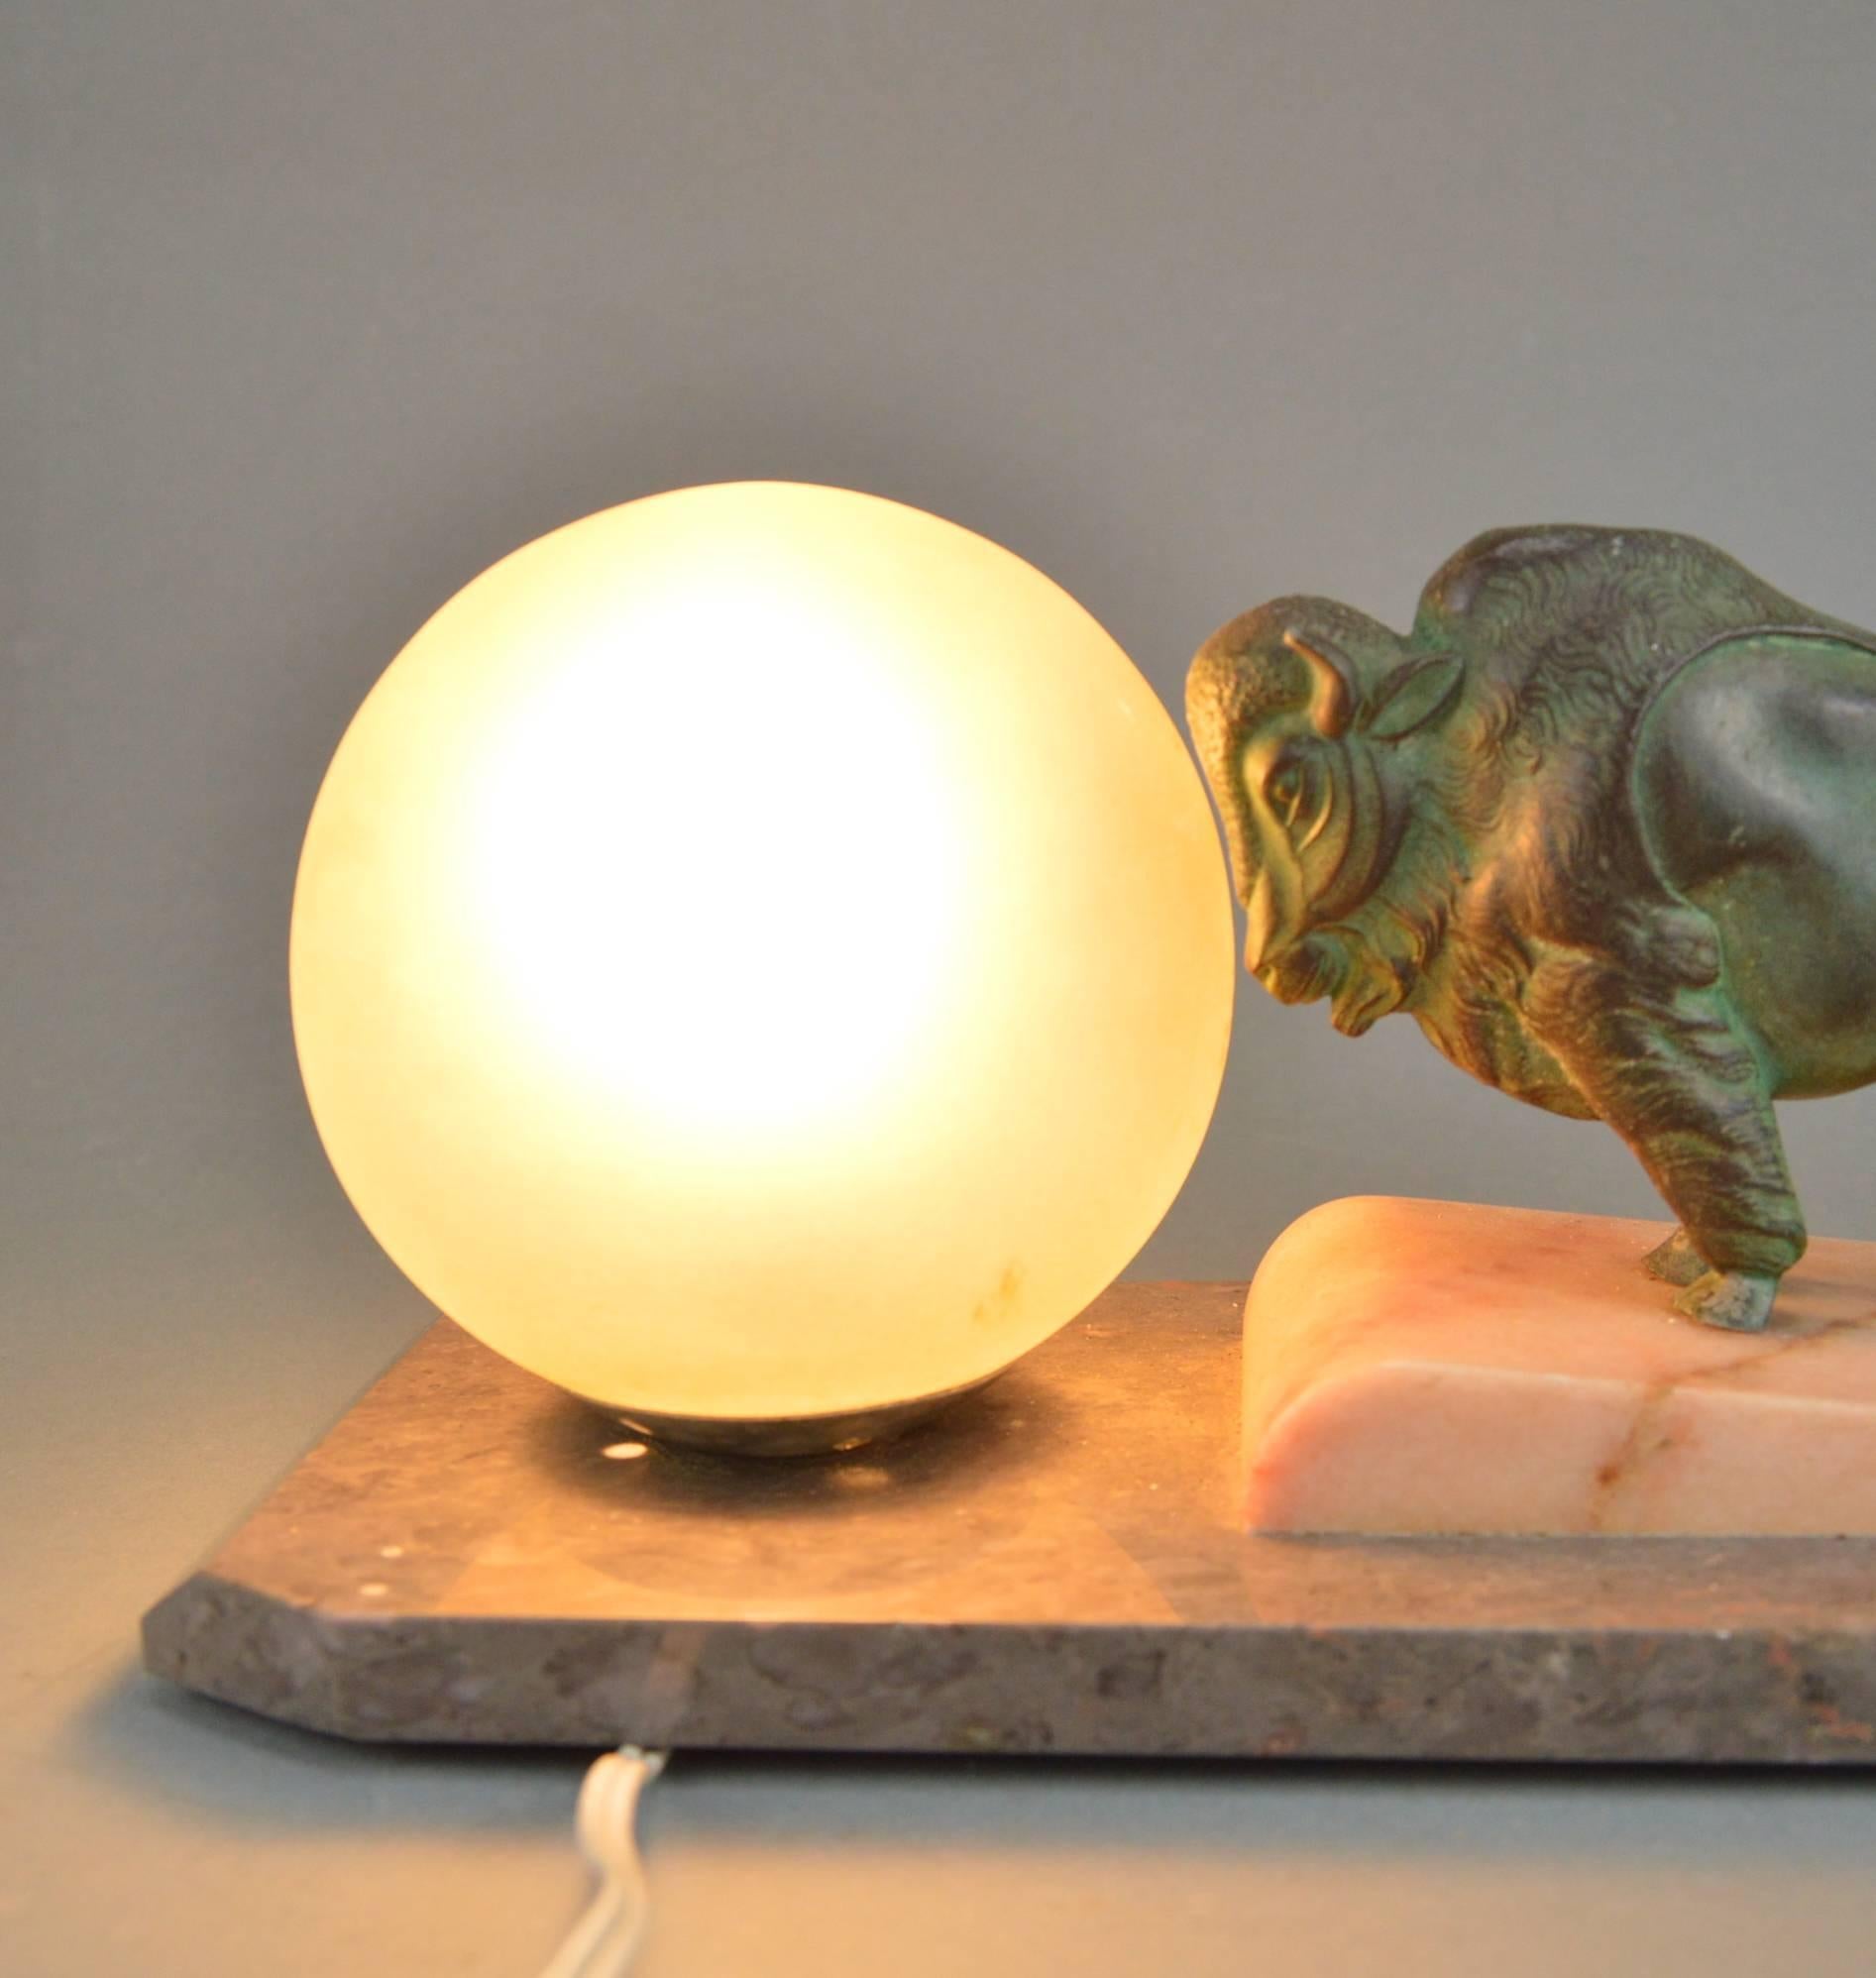 Early 20th Century Beautiful Original Art Deco Lamp Representing a Bison Pushing a Ball, 1920